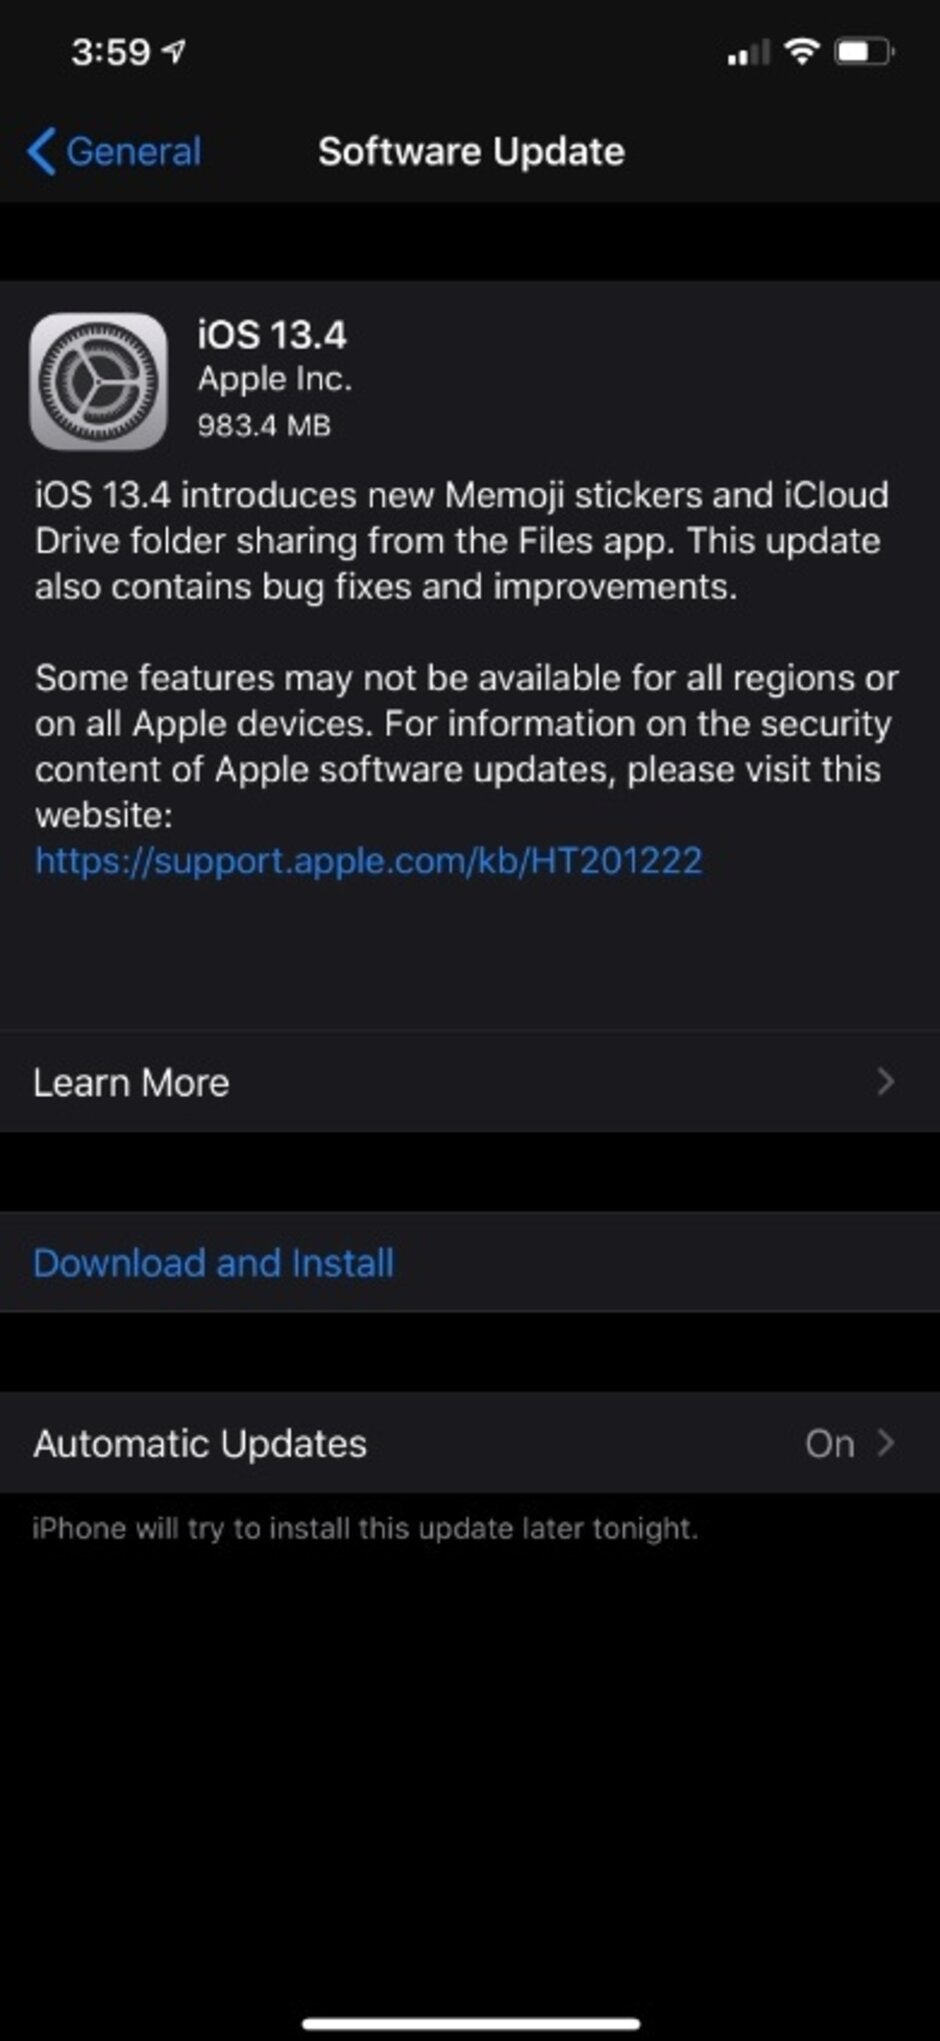 Apple disseminates iOS 13.4 and iPadOS 13.4 - Apple drops iOS 13.4 and iPadOS 13.4 with some great features and bug fixes